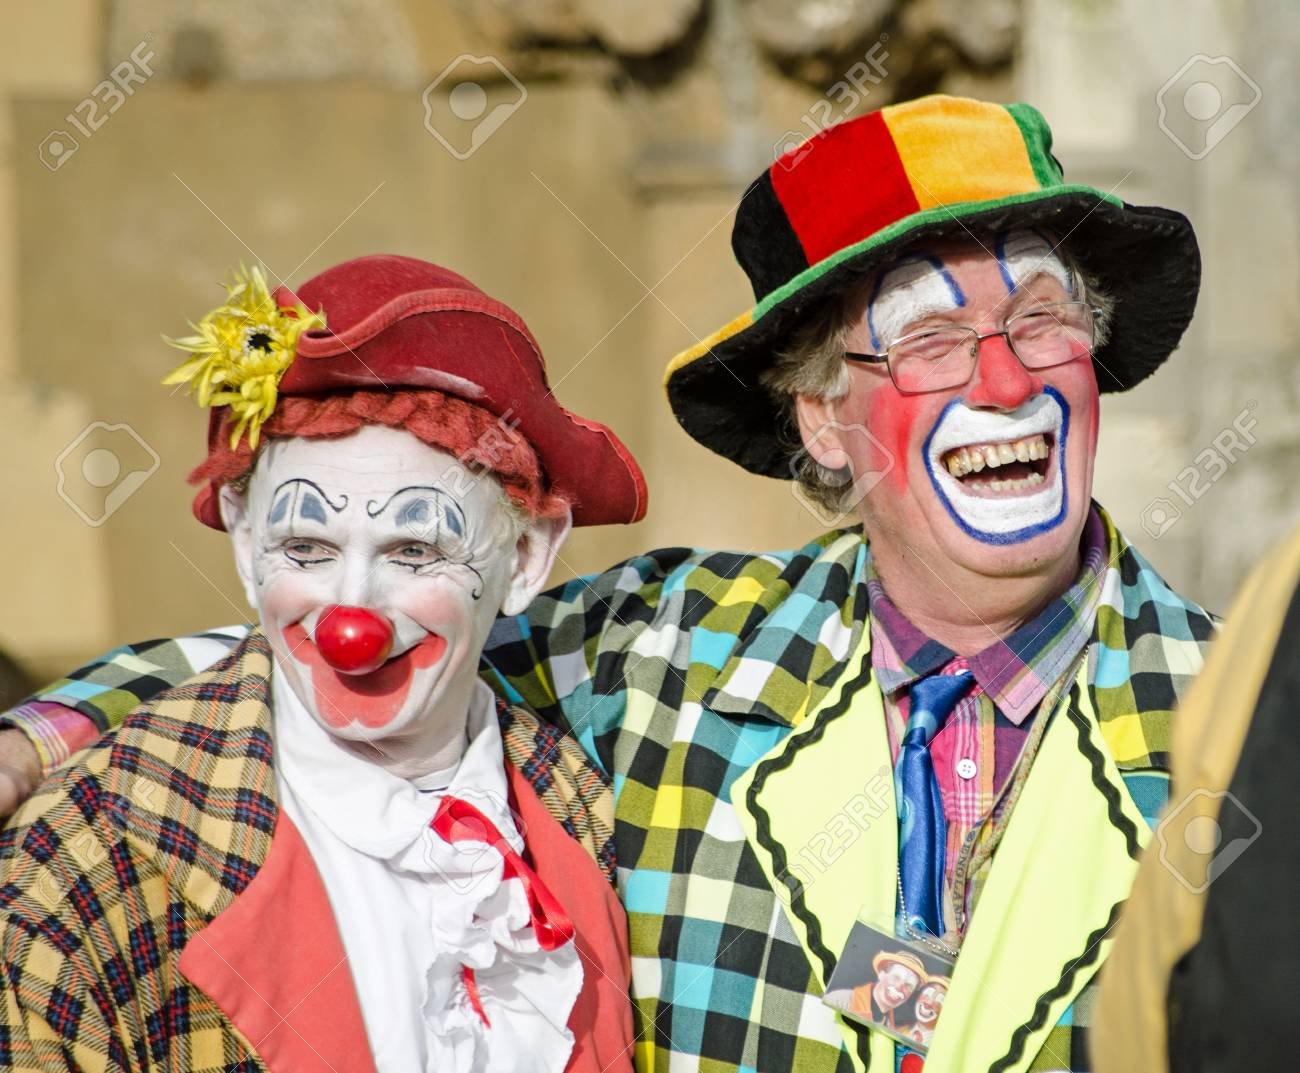 109x90-123573425-london-uk-february-7-2016-two-clowns-sharing-a-joke-ahead-of-the-annual-church-service-in-memory-of-1.jpg